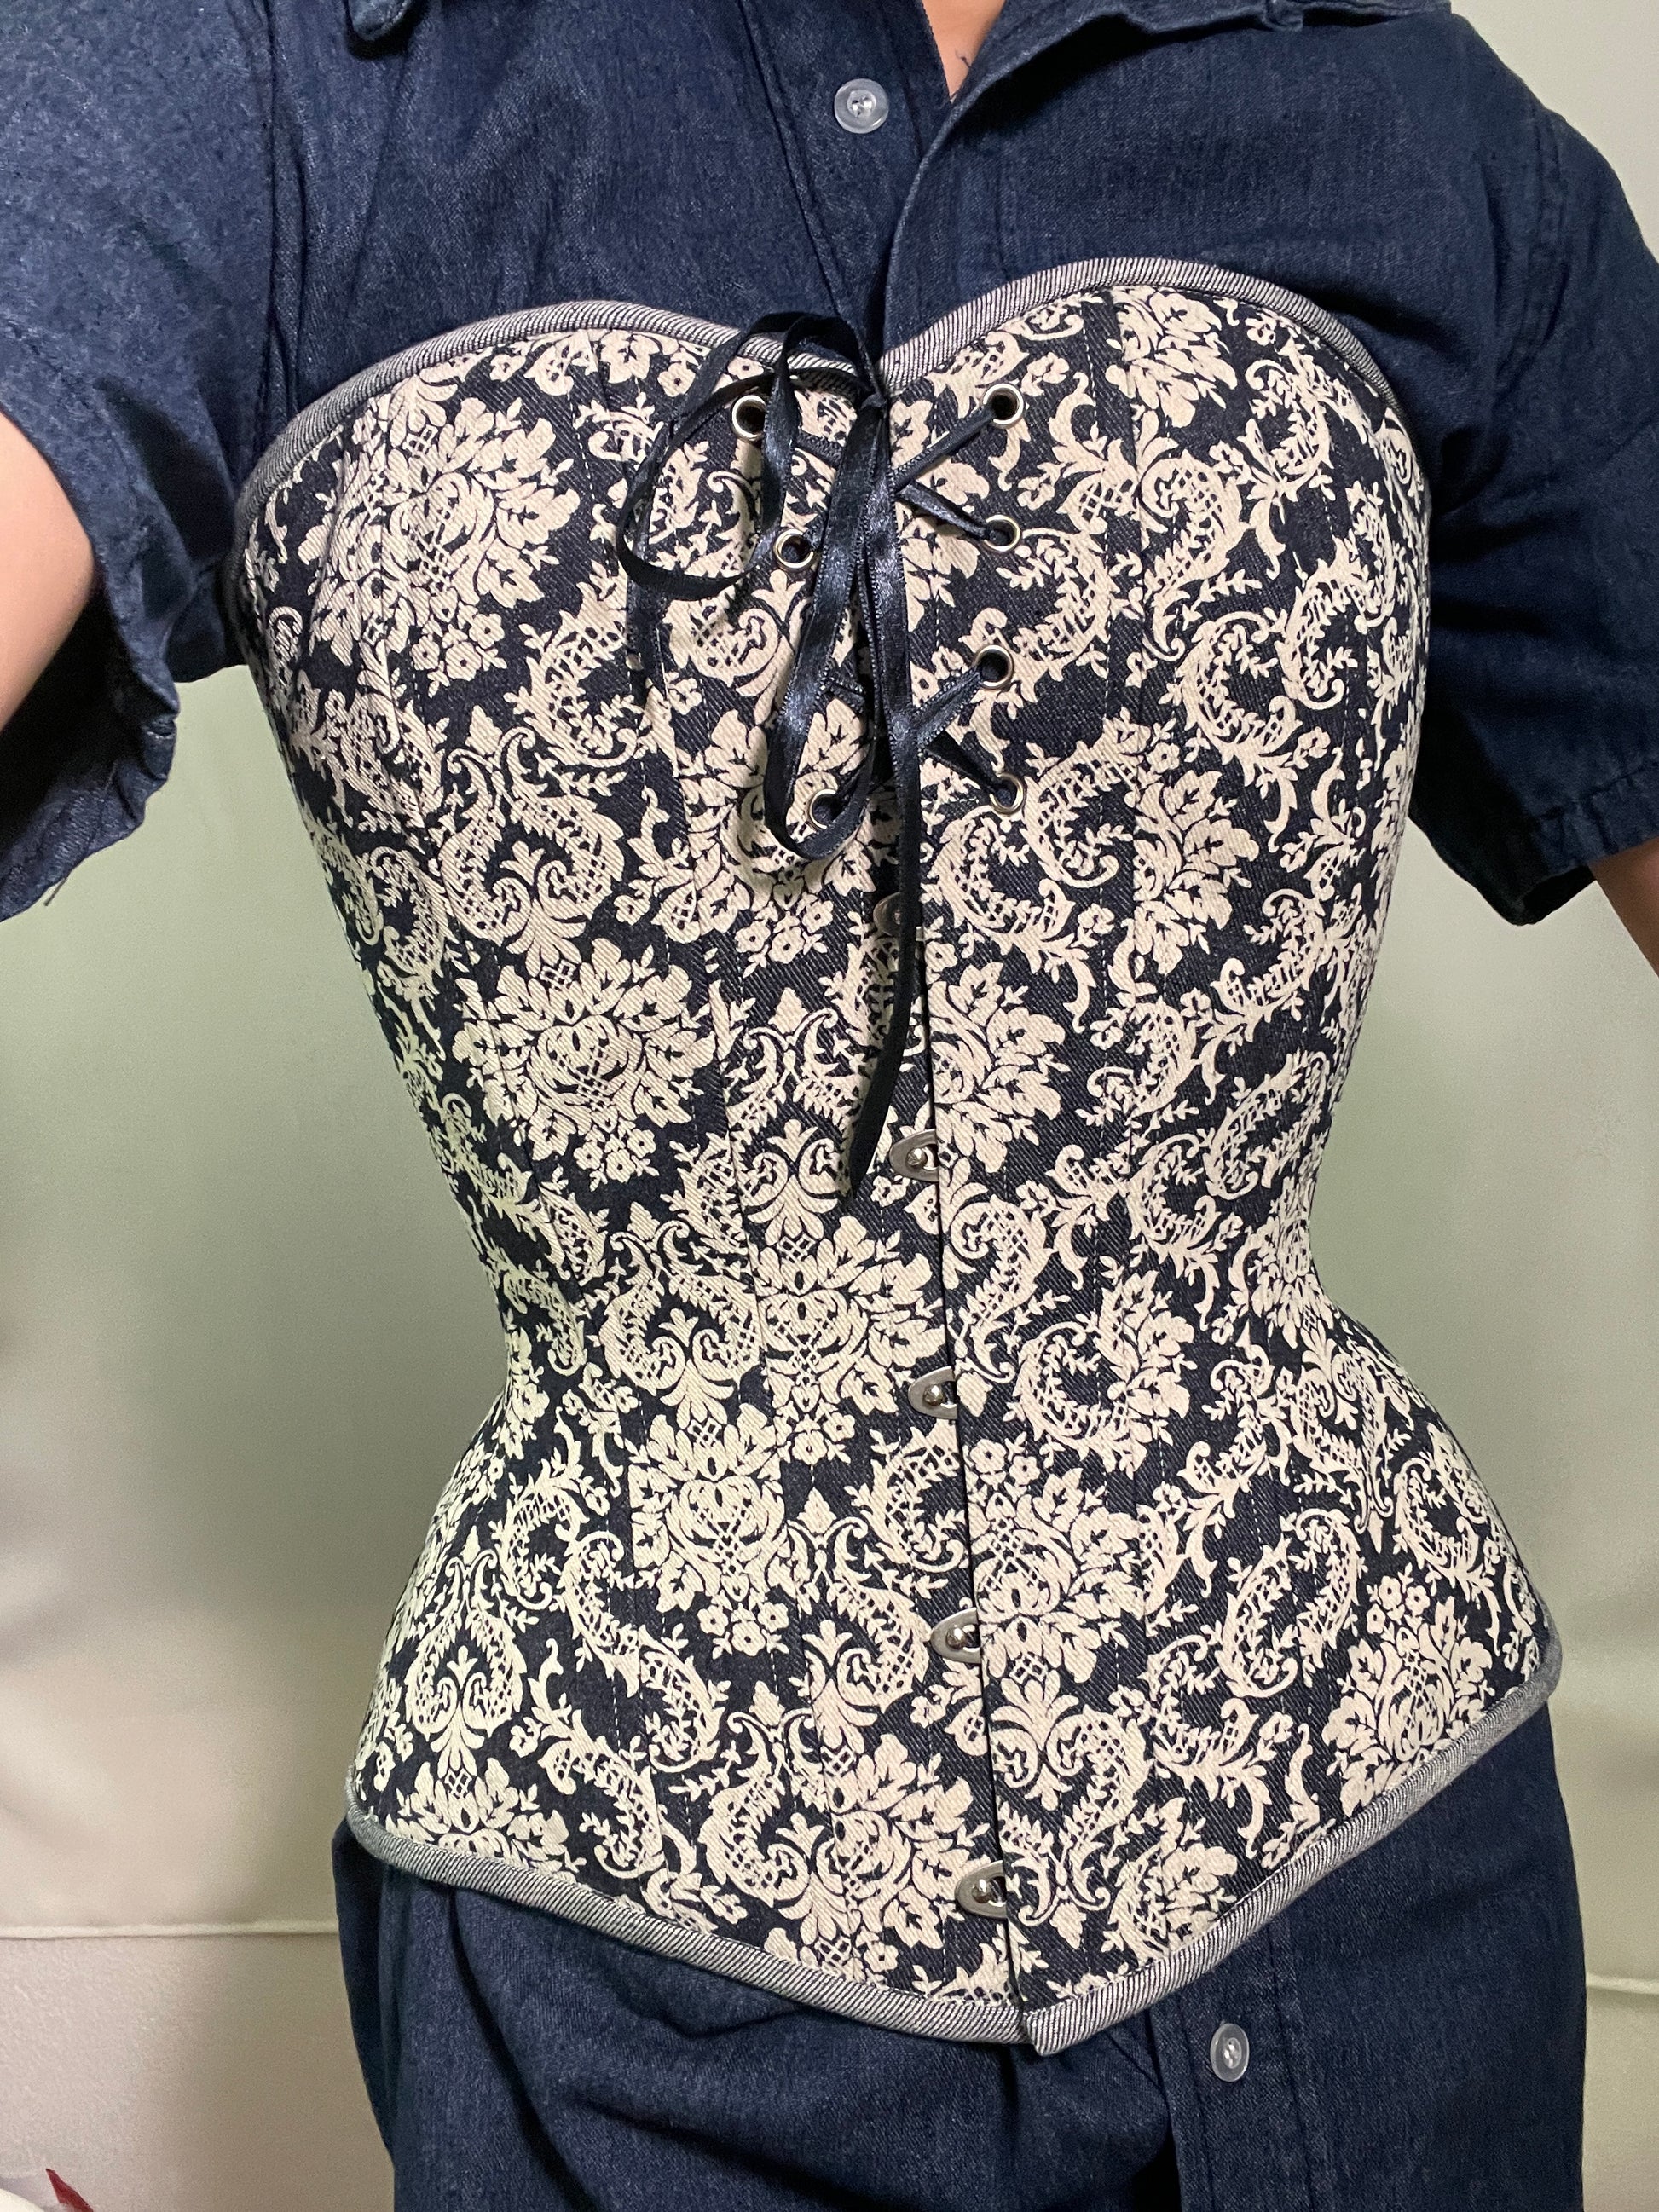 Teal and Mauve Brocade Overbust Corset, Hourglass Silhouette, Regular –  Timeless Trends